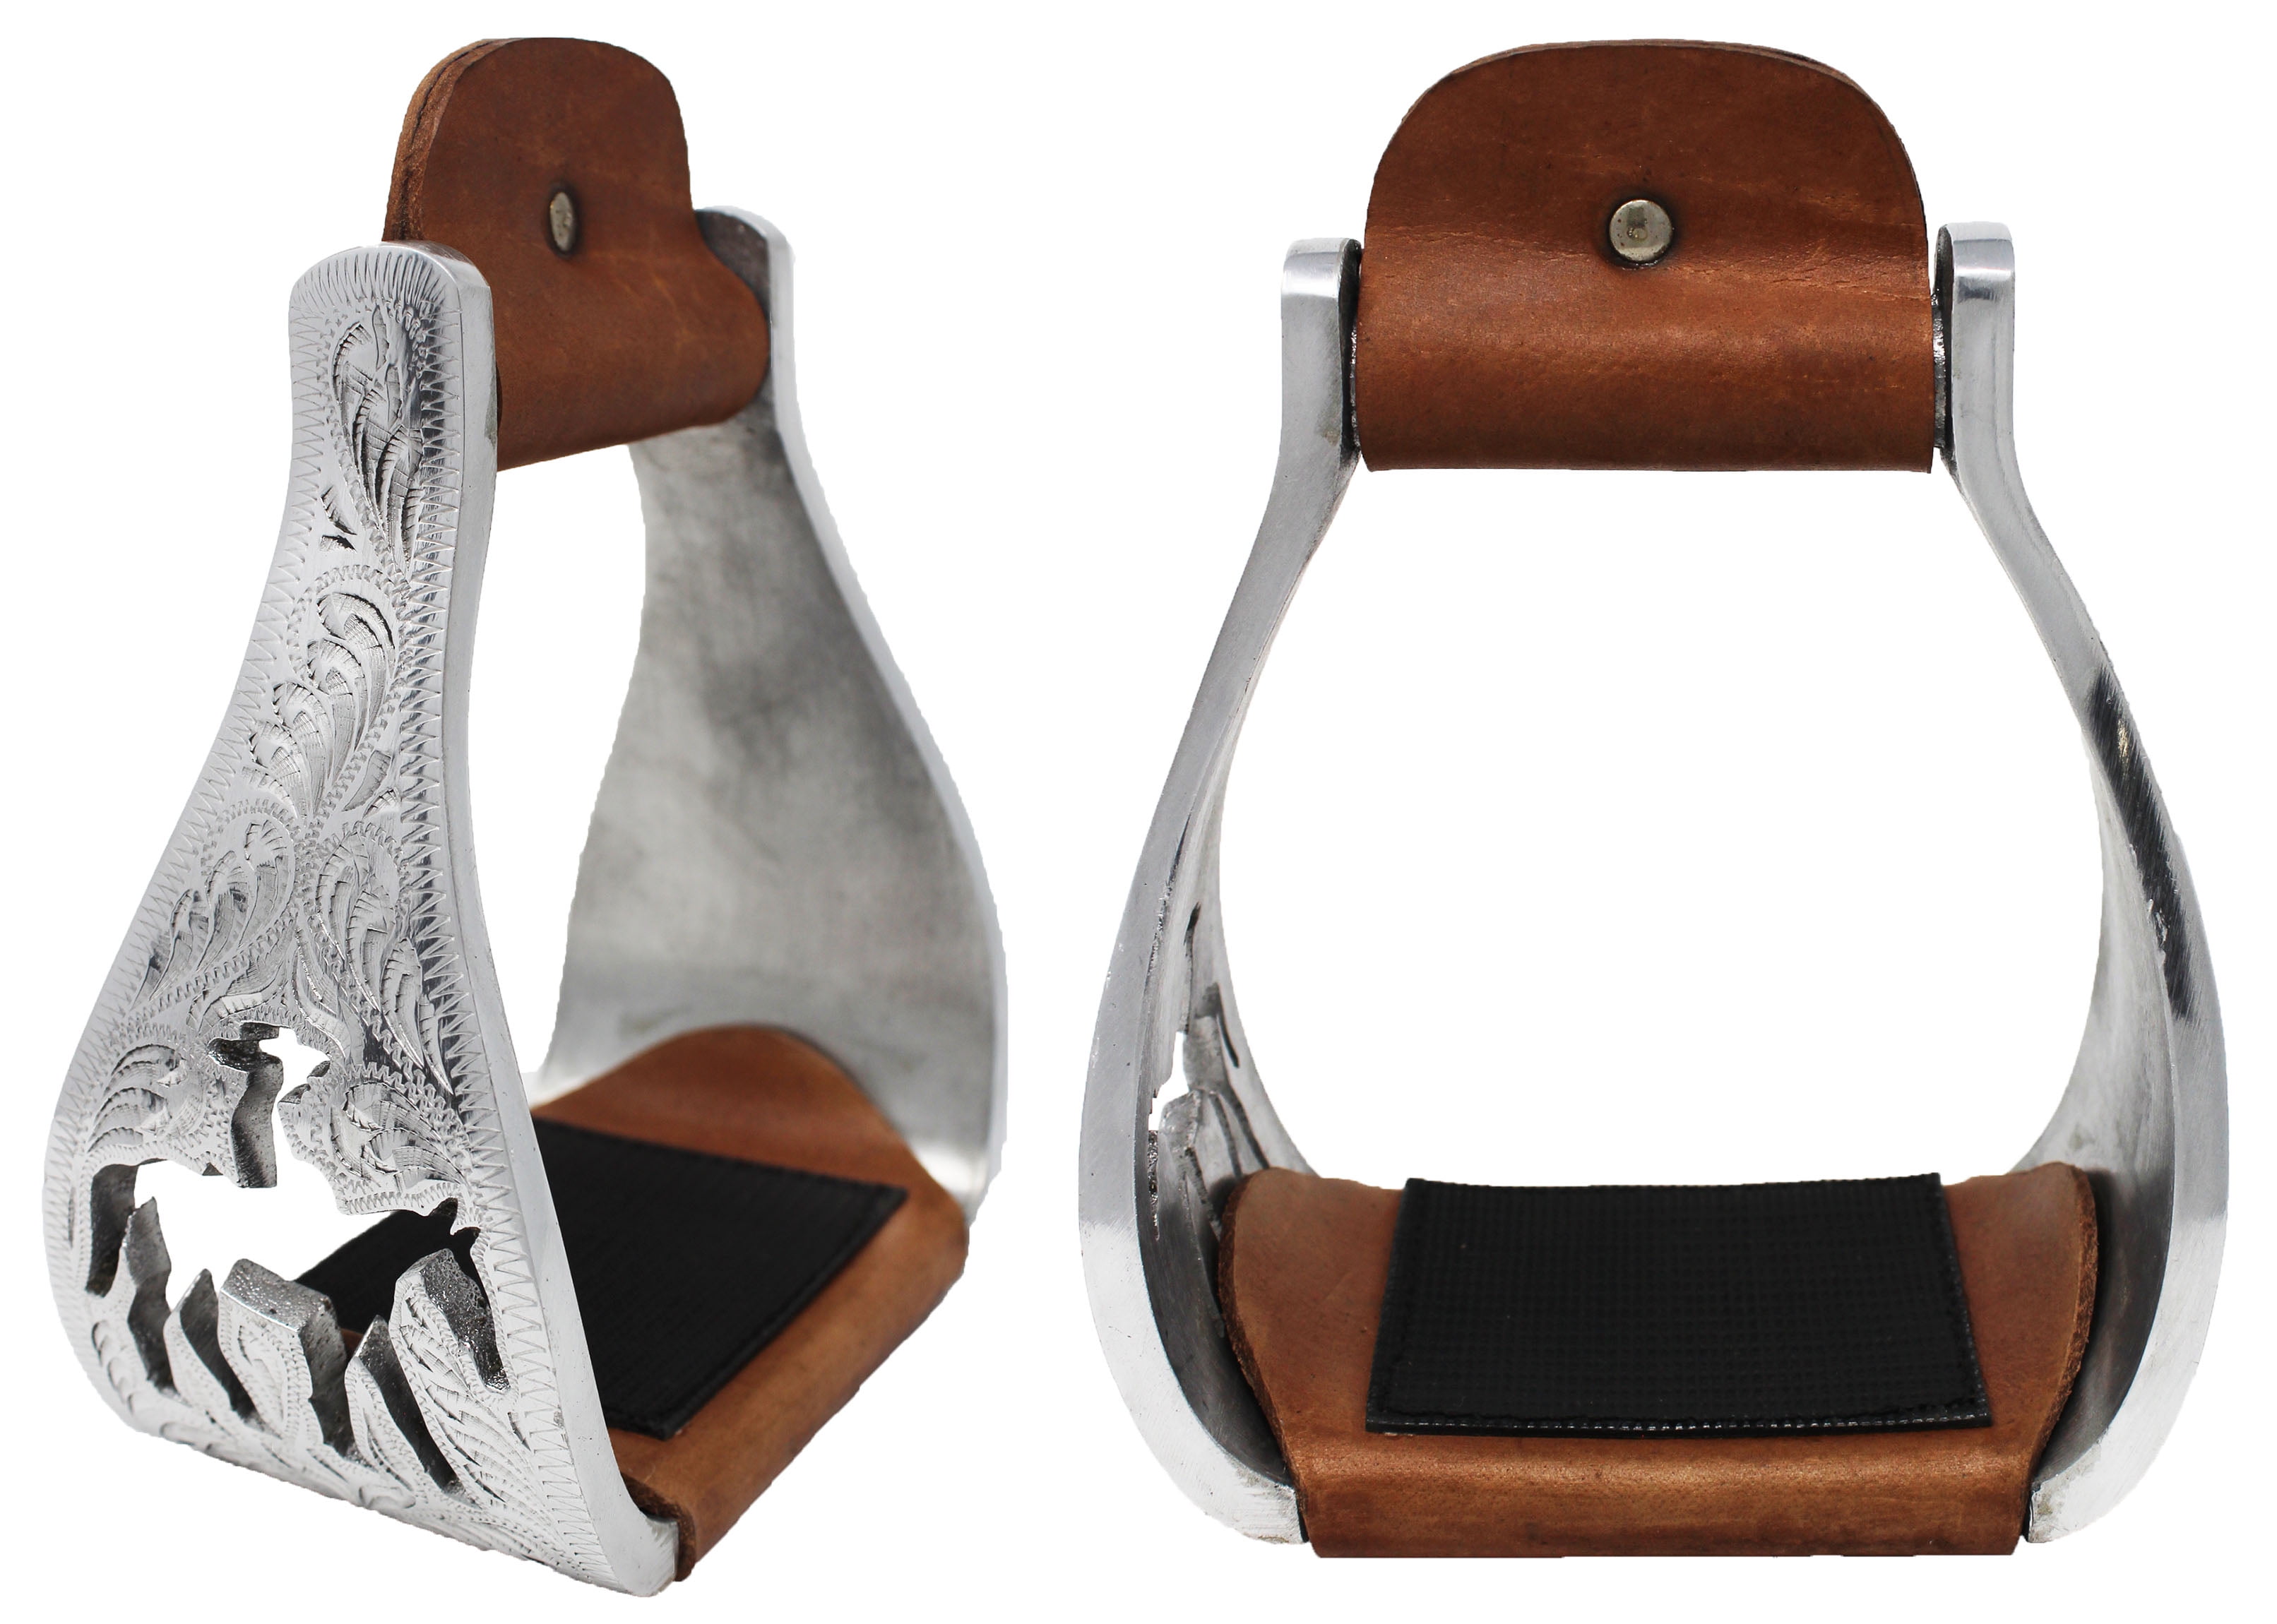 NEW Showman Rawhide Covered Western Stirrups w/ Leather Lacing FREE SHIPPING! 